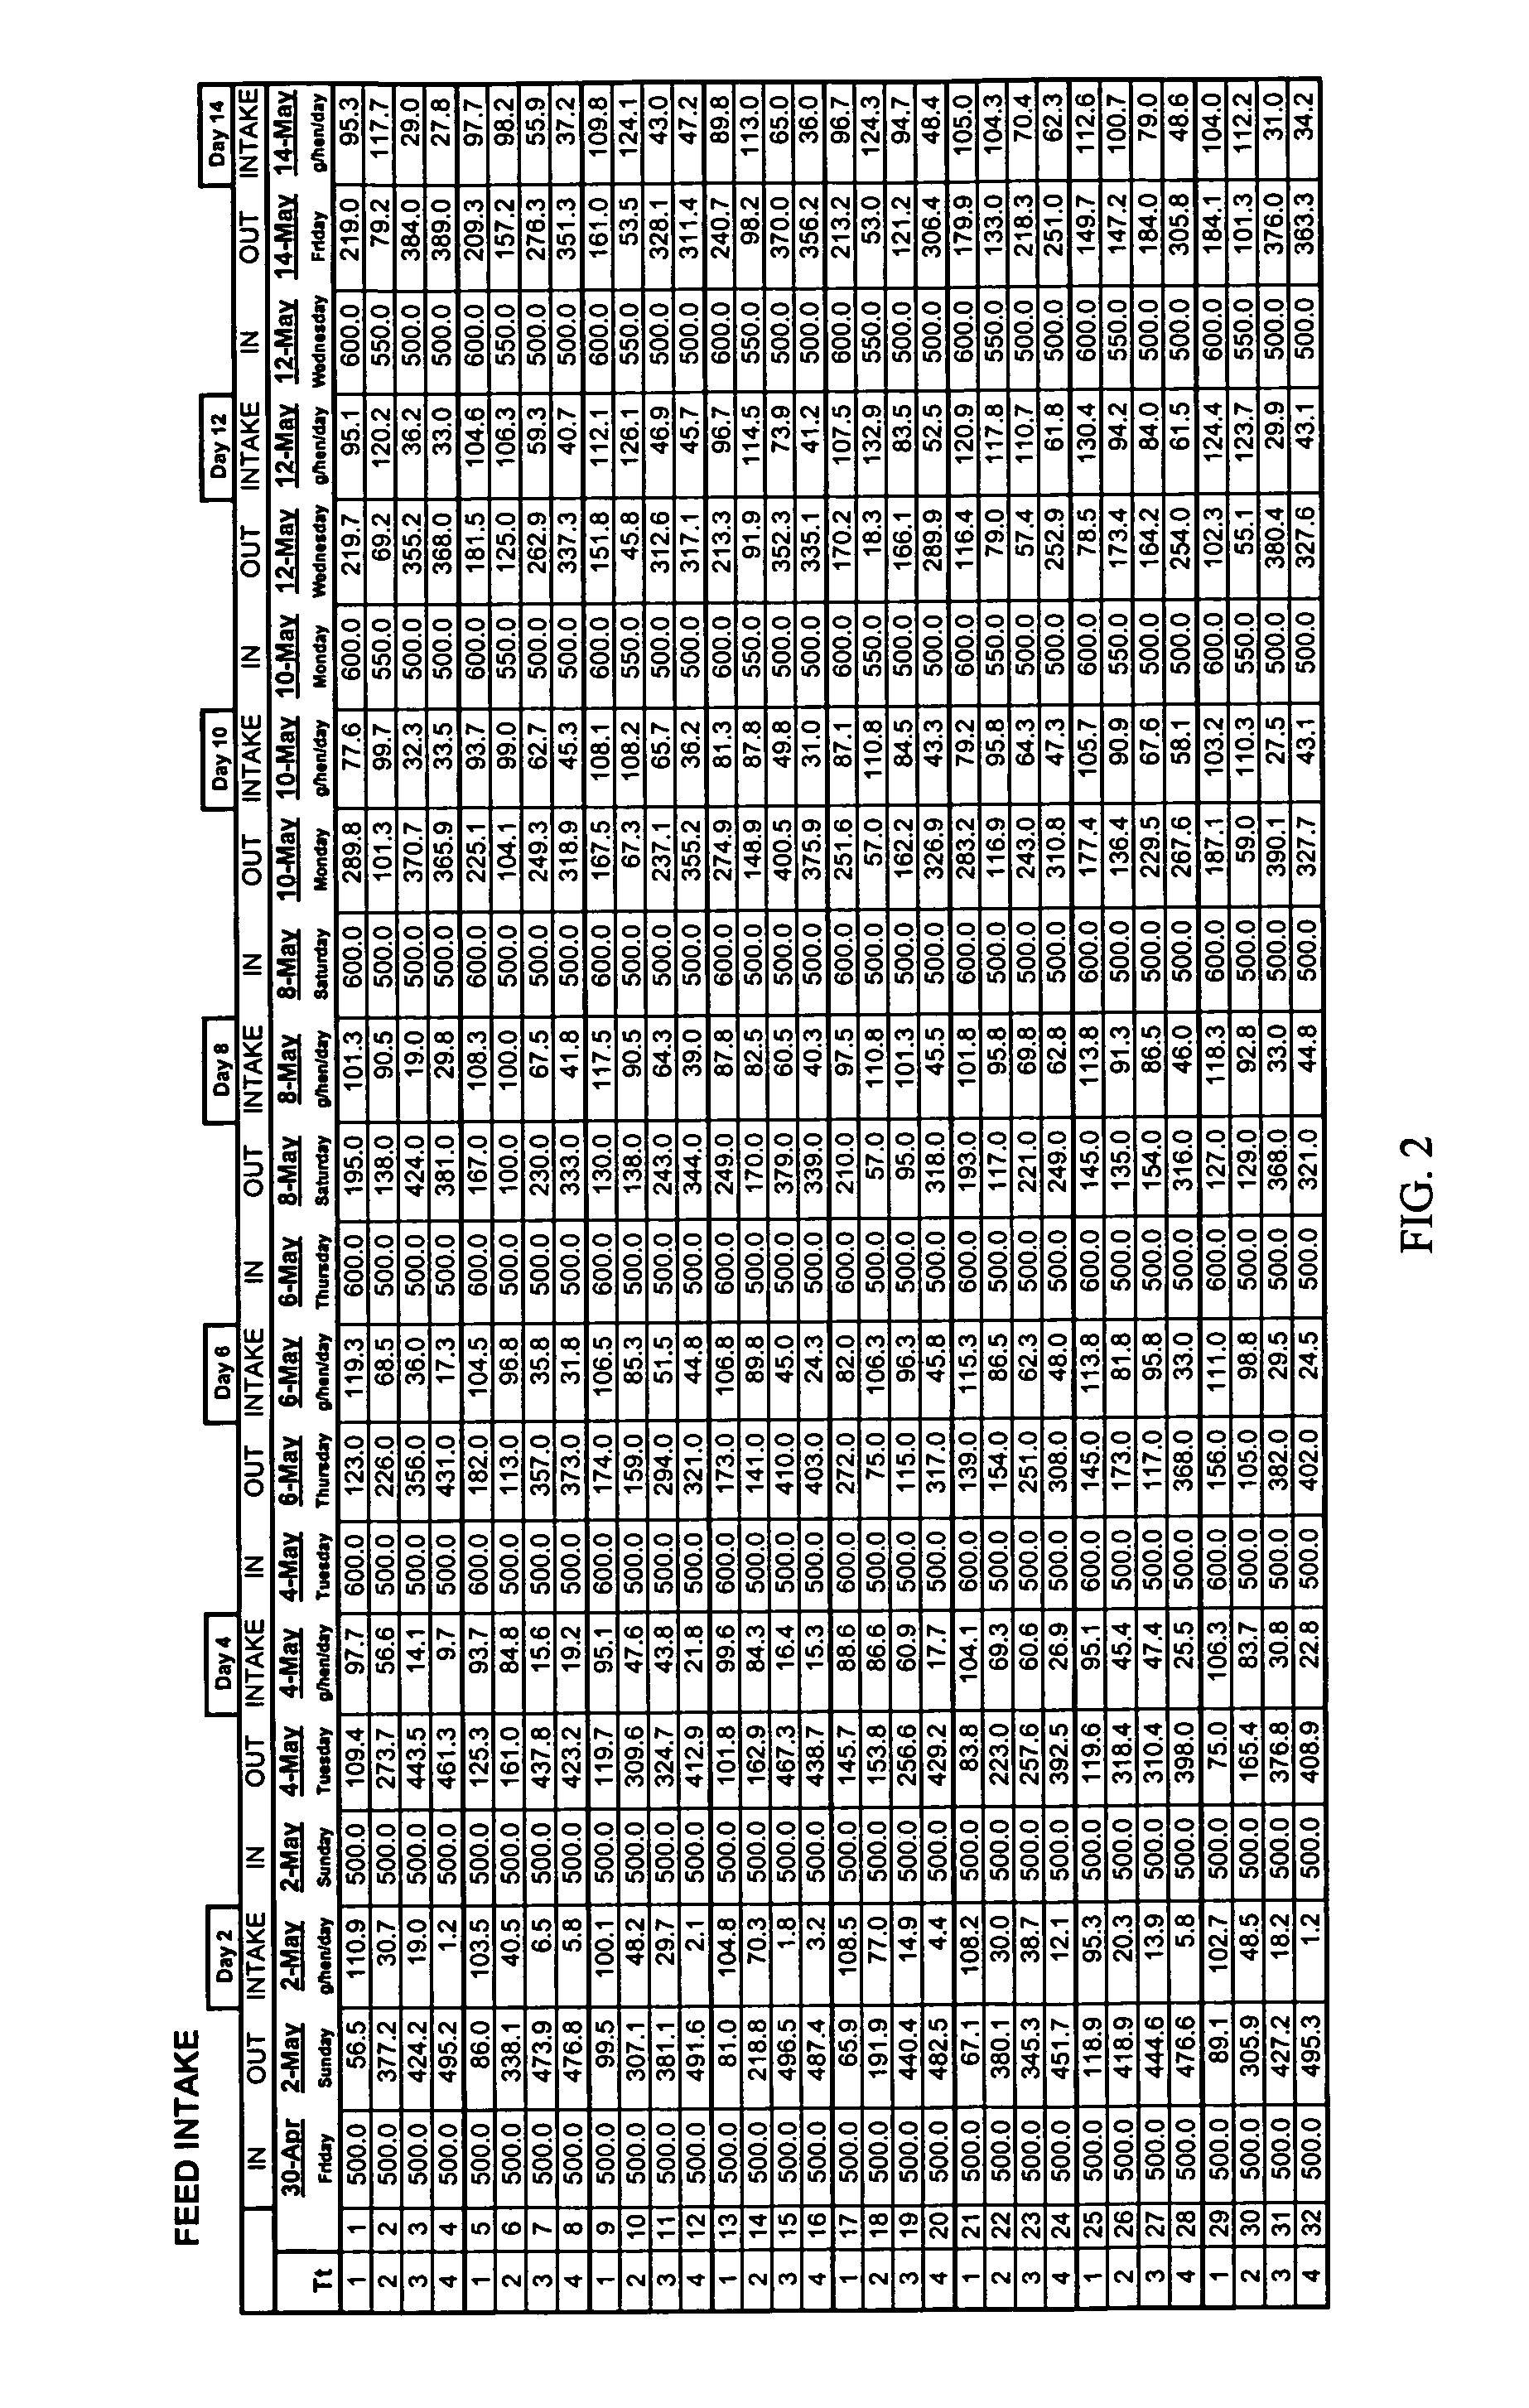 Chicken feed composition and method of feeding chickens for promoting health or rejuvenating egg production